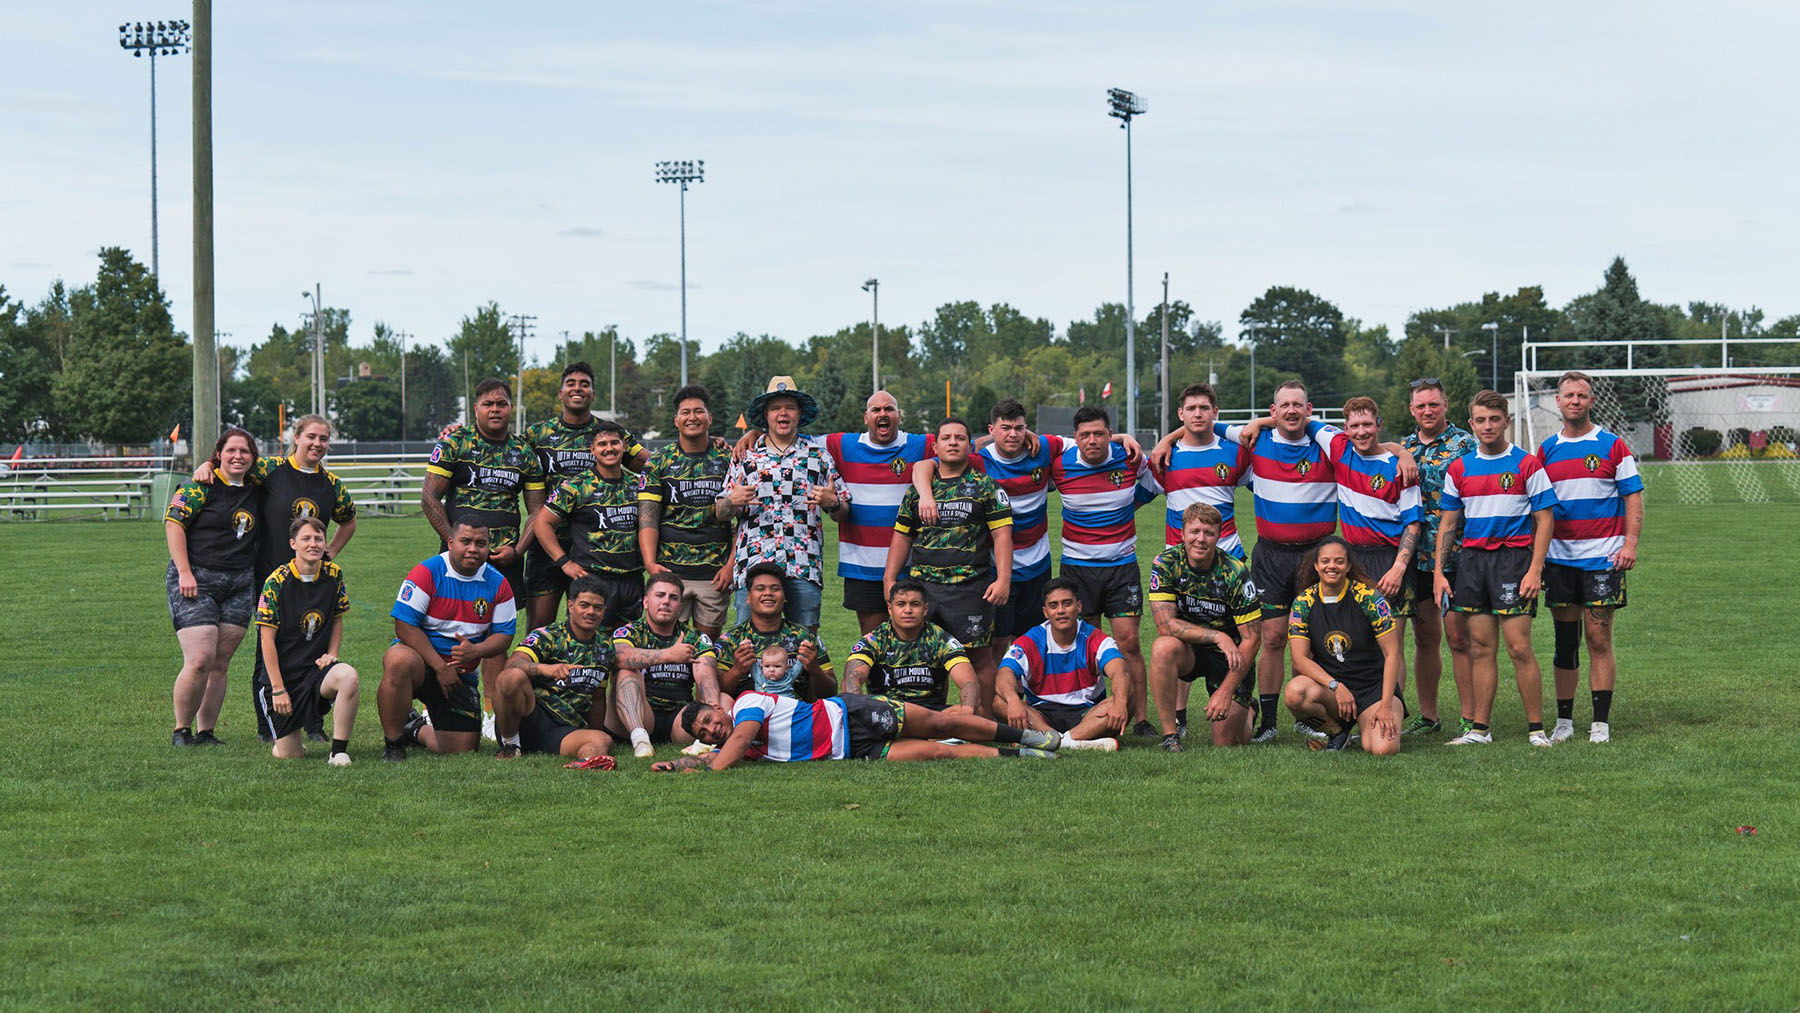 Photo of the members of the Barracks Rangers Rugby Club on the pitch